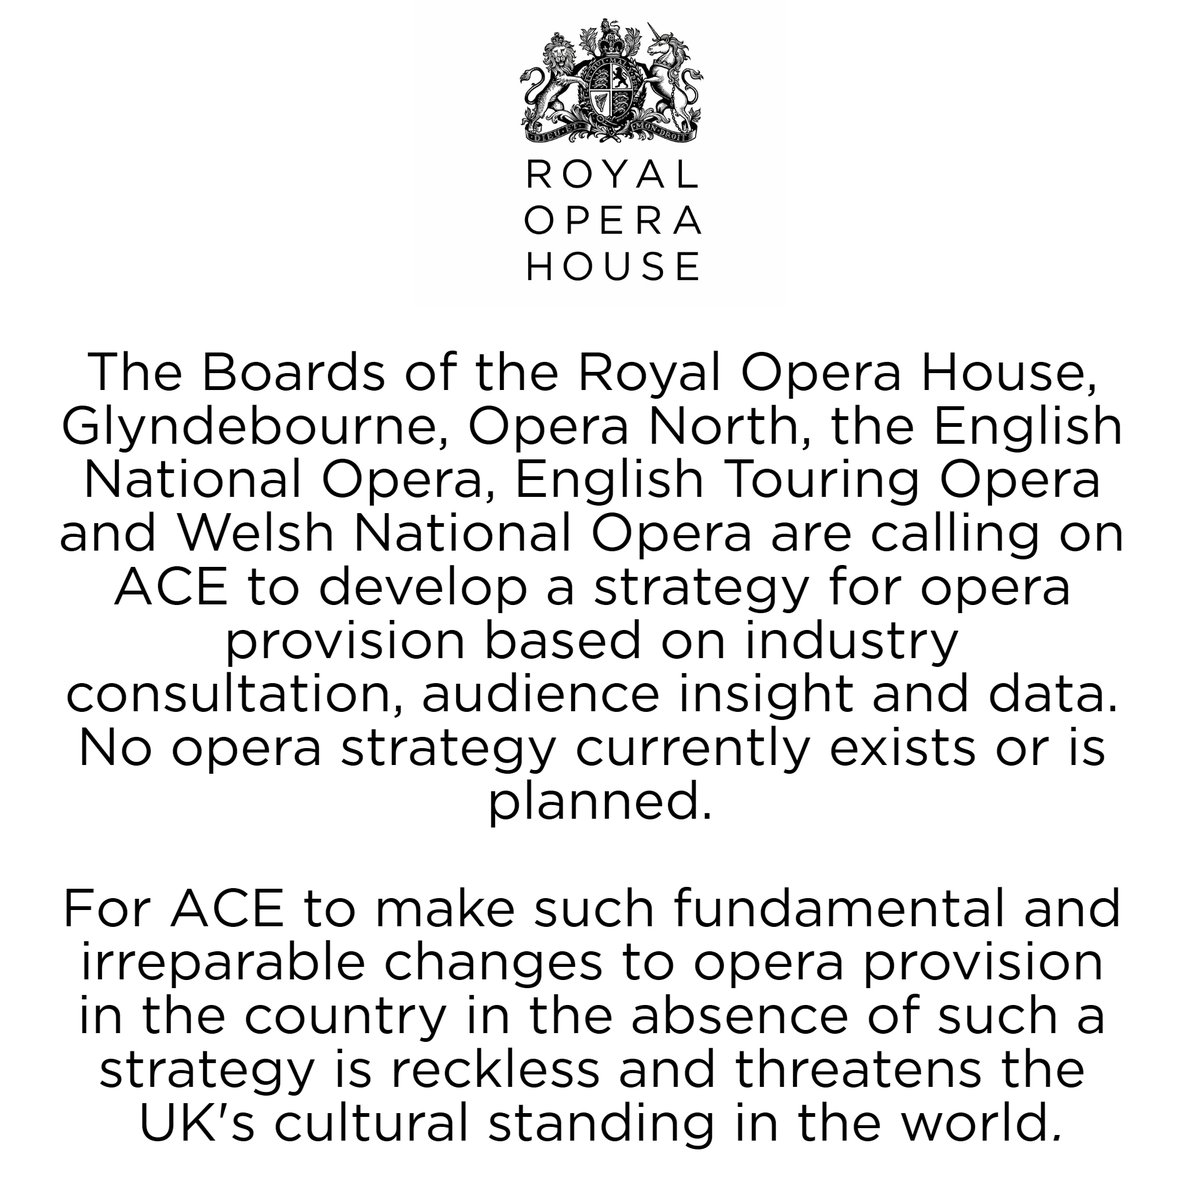 We call on @ace_national and @HENLEYDARREN to develop an opera strategy, in conversations with audiences and our colleagues across the industry @E_N_O @glyndebourne, @Opera_North, @ETOpera and @WNOtweet